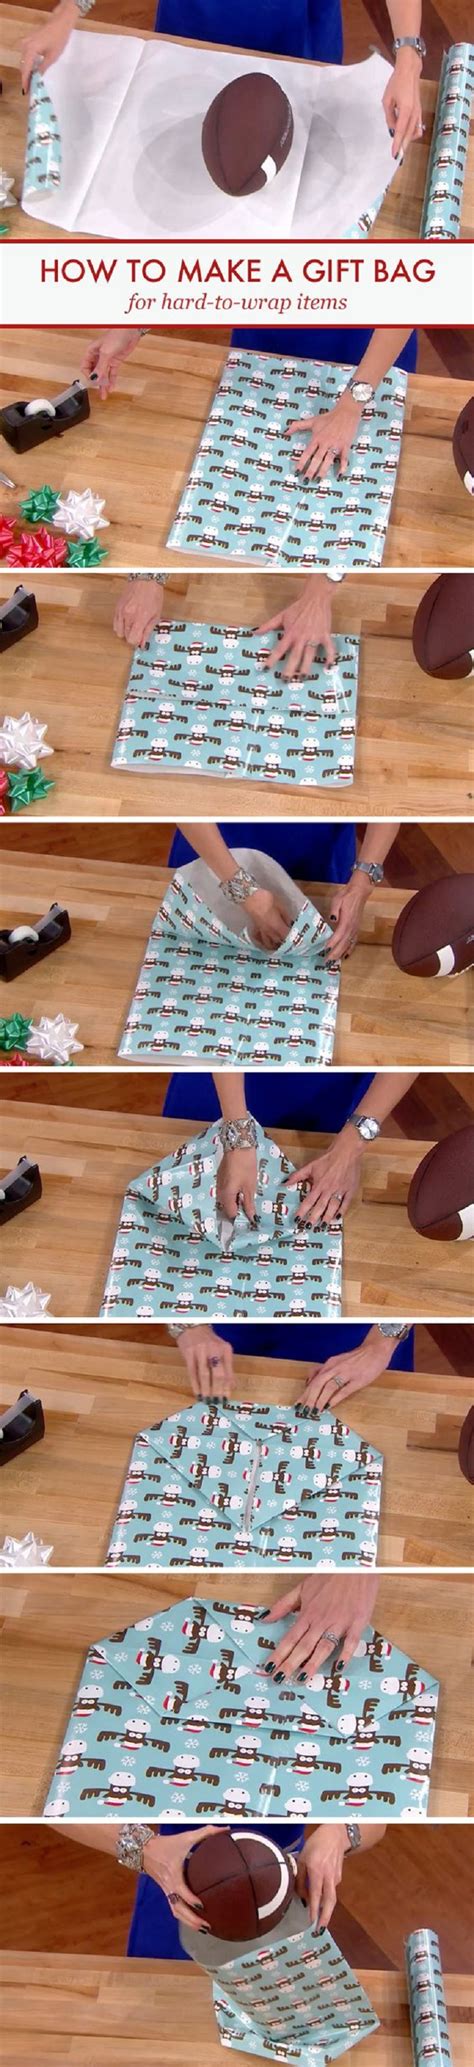 Making your own gift wrap is a chance not only to save money but help the environment by recycling or repurposing products. 14 Useful yet Unique DIY Gift Wrapping Tutorials You ...